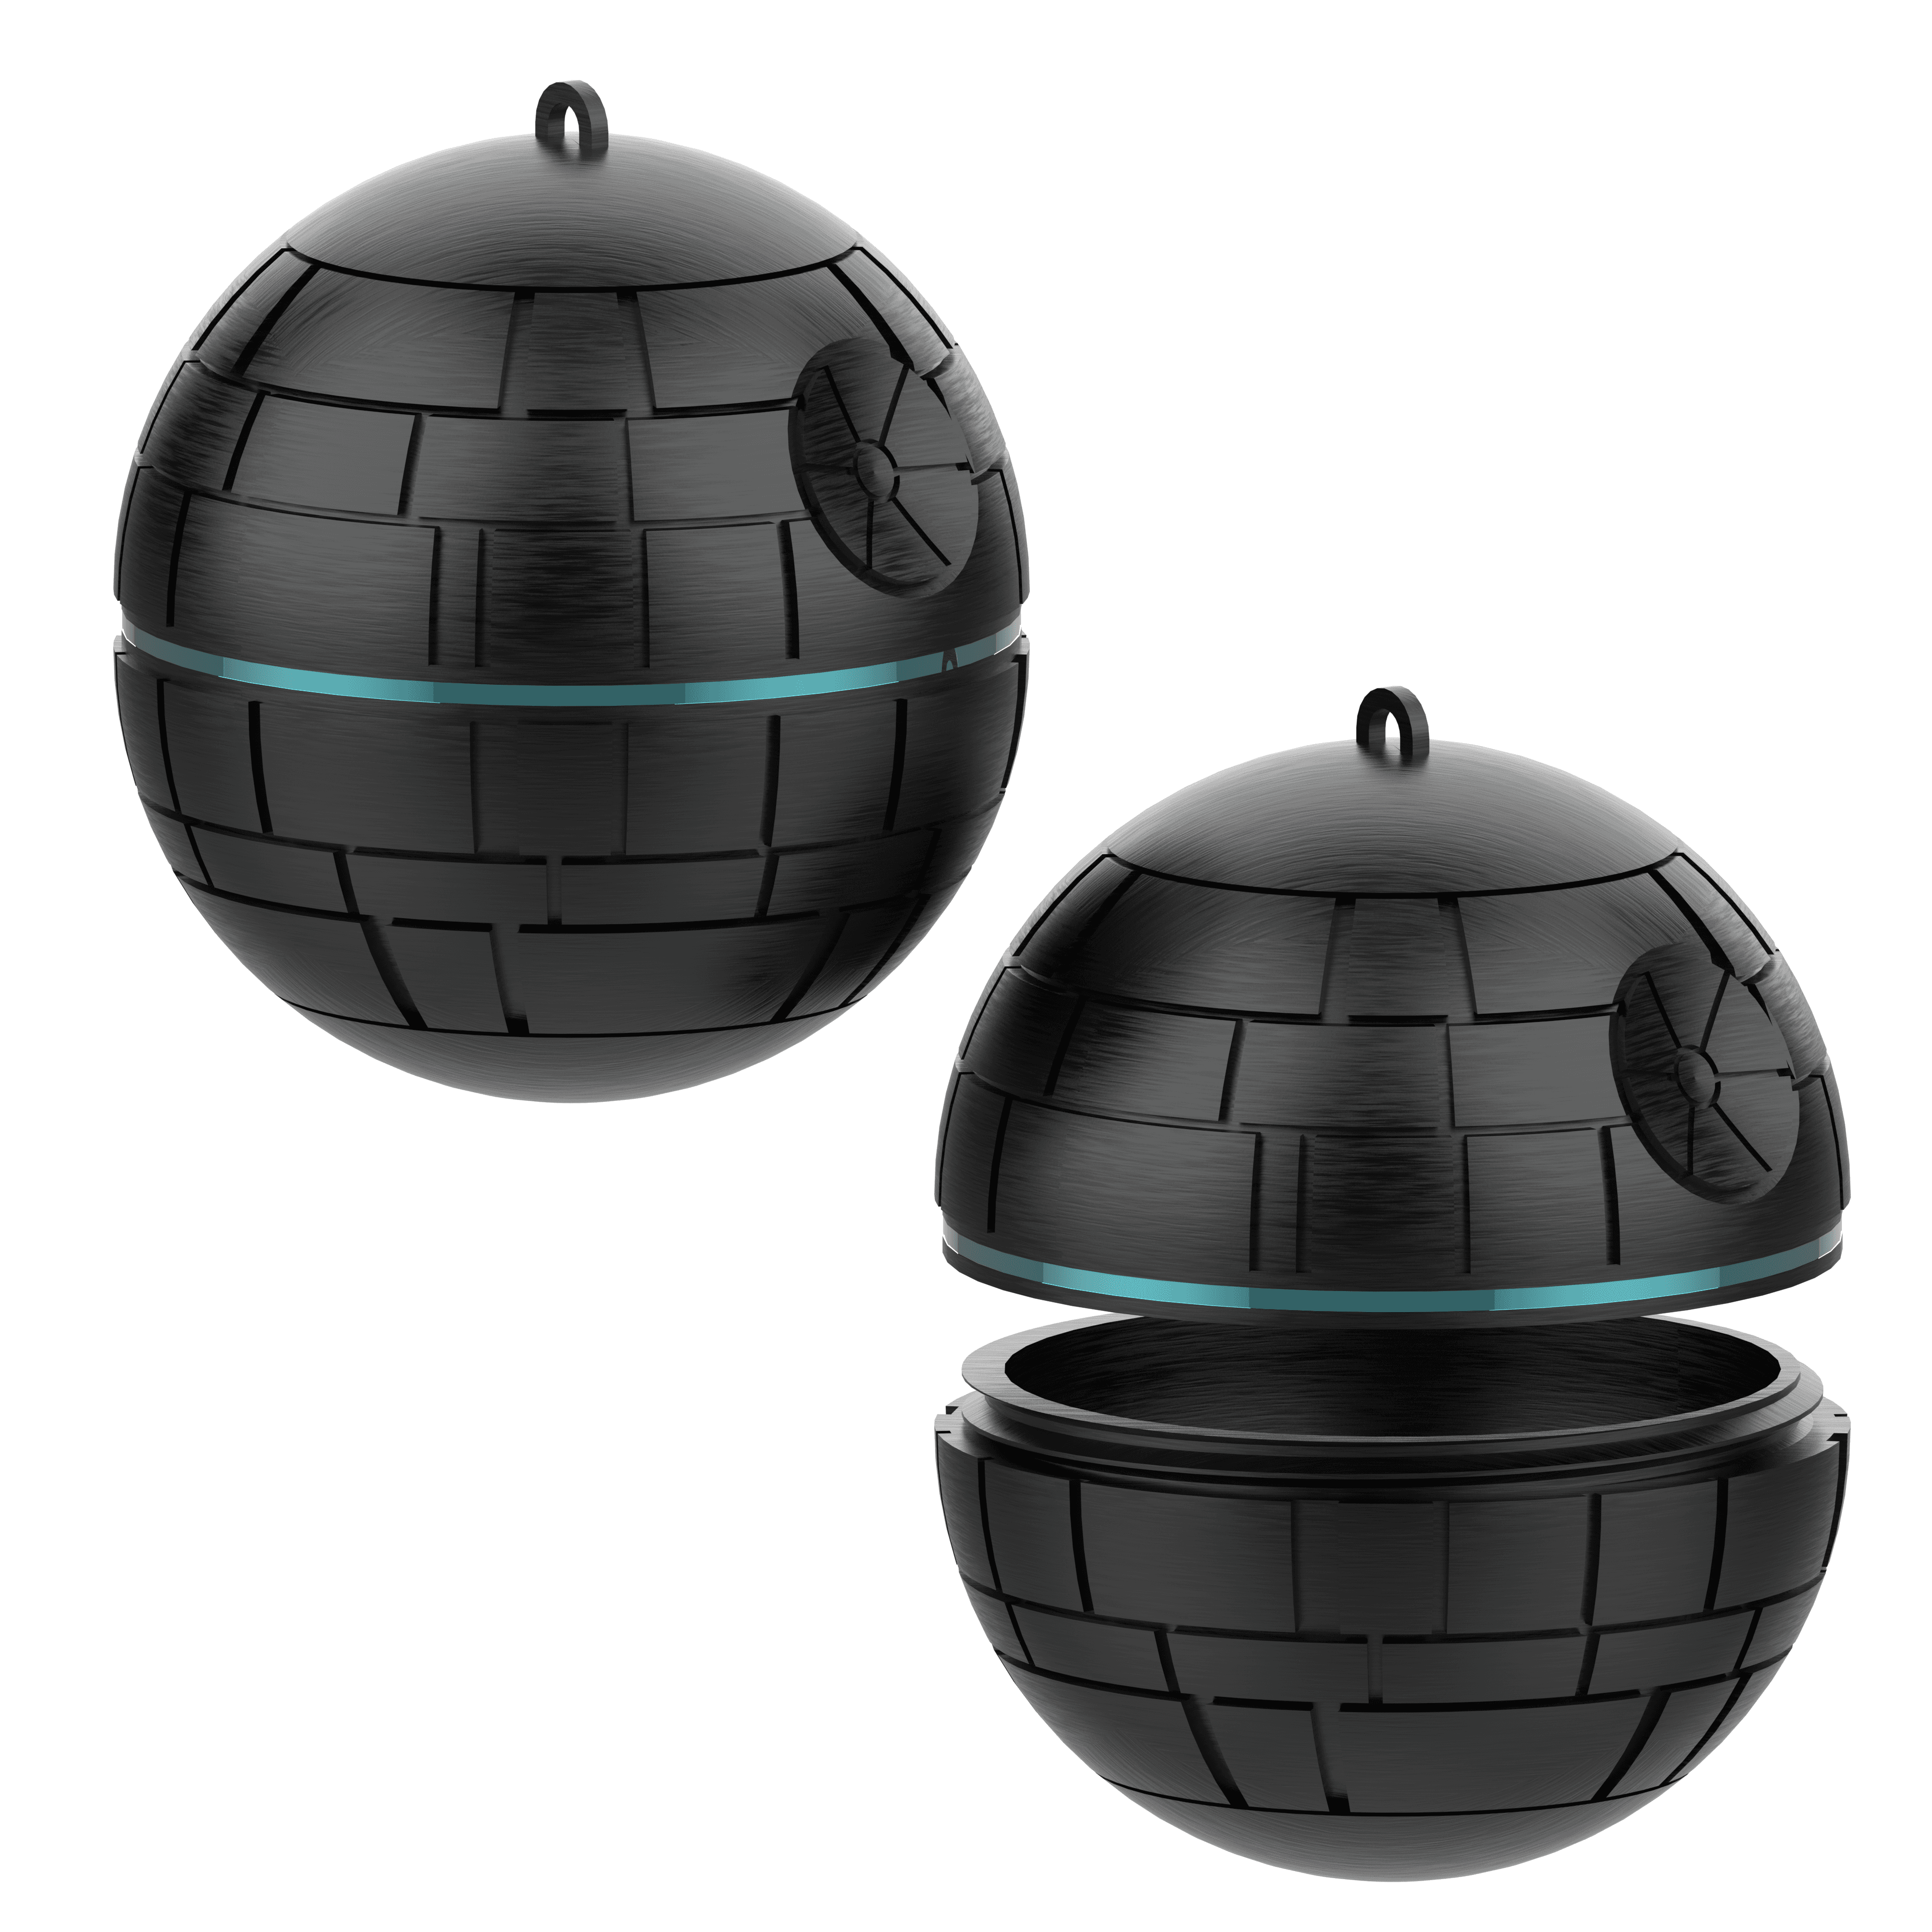  Star Wars Death Star Container 3d model